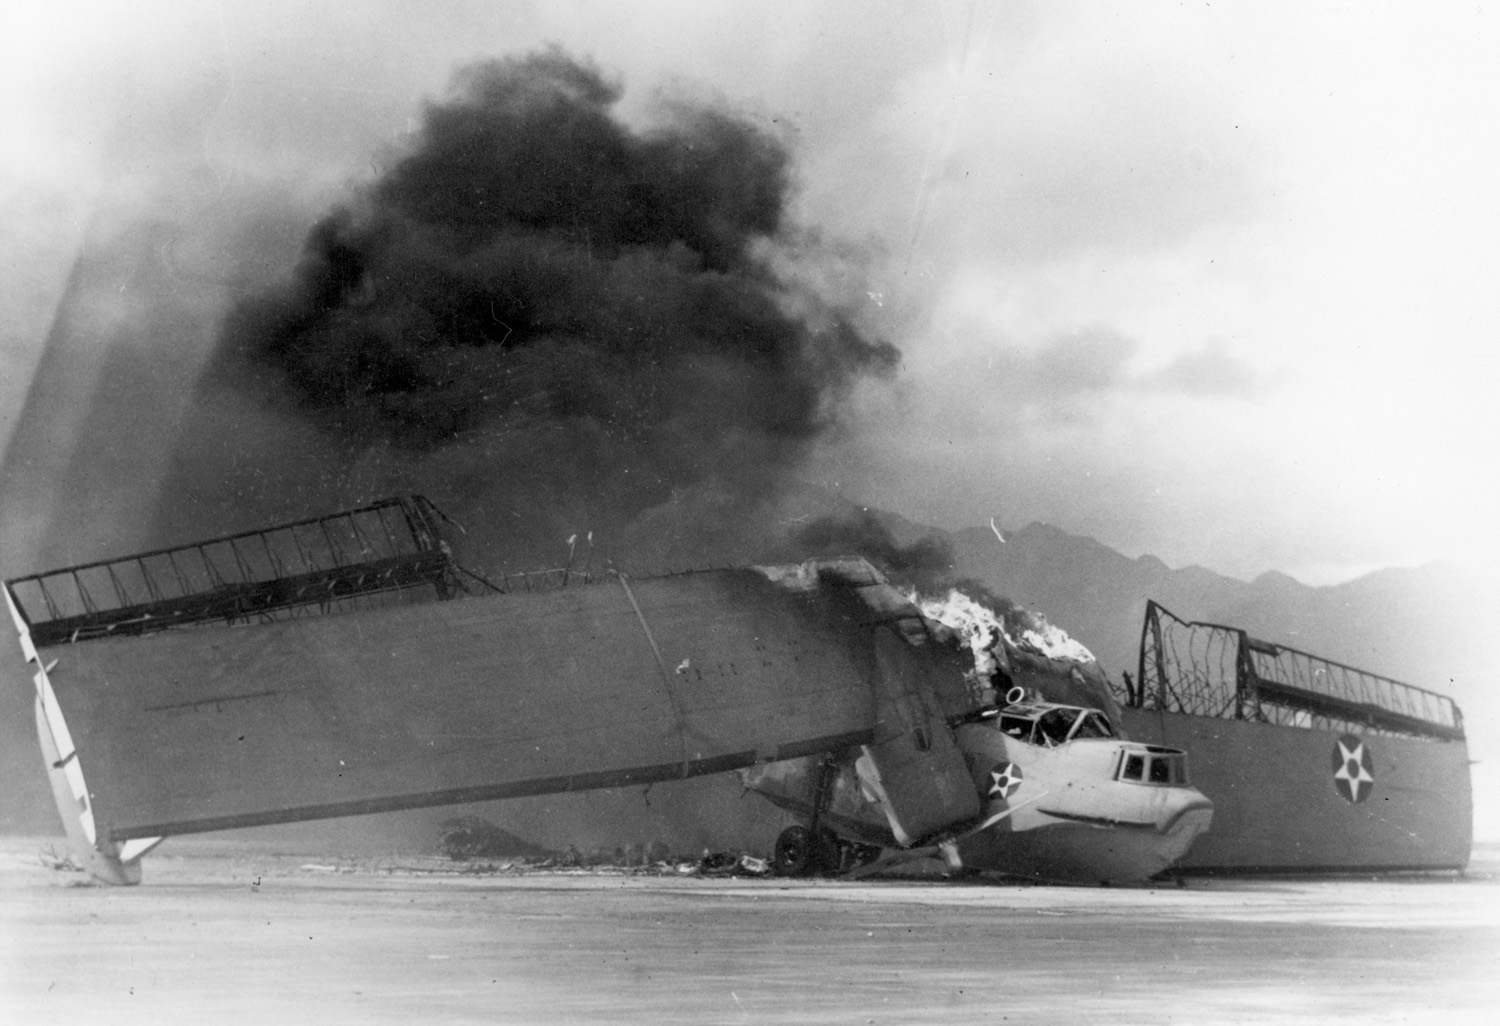 In a photo believed previously unpublished, a Consolidated PBY Catalina flying boat burns fiercely following the Japanese attack on Pearl Harbor.